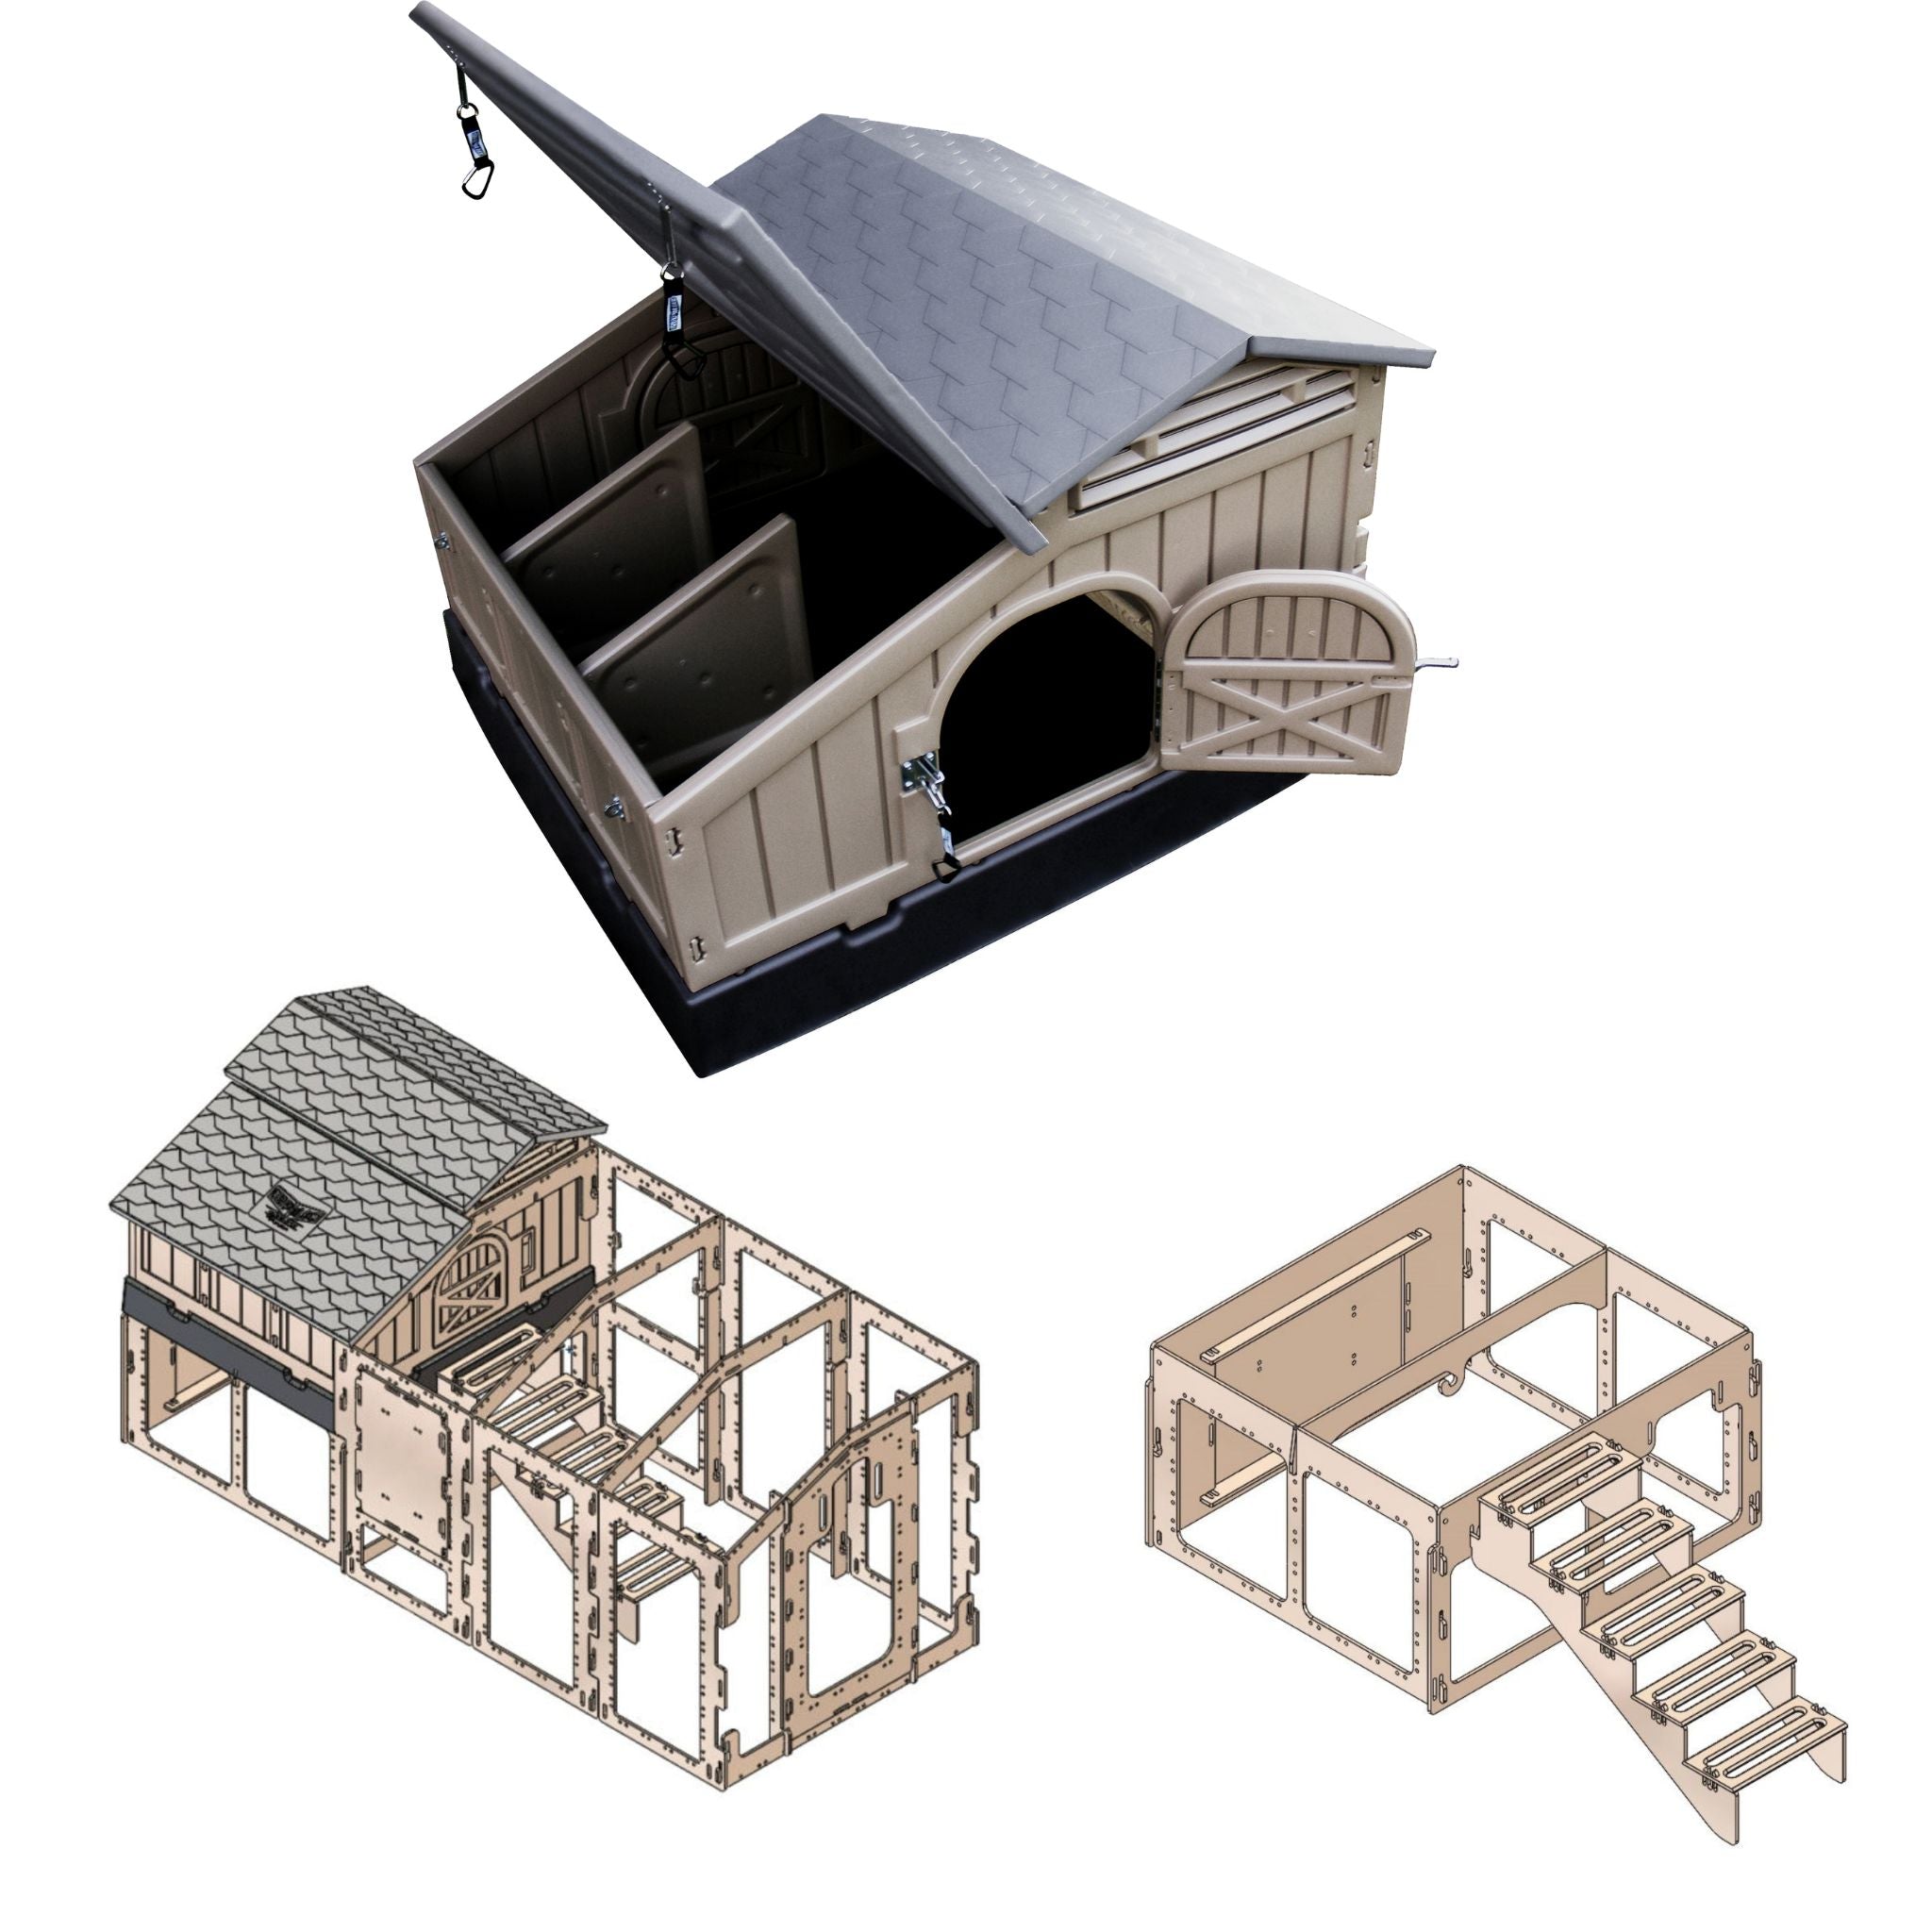 Standard Snaplock by Formex Chicken coop with stand and stairs and run. 4 bird chicken coop